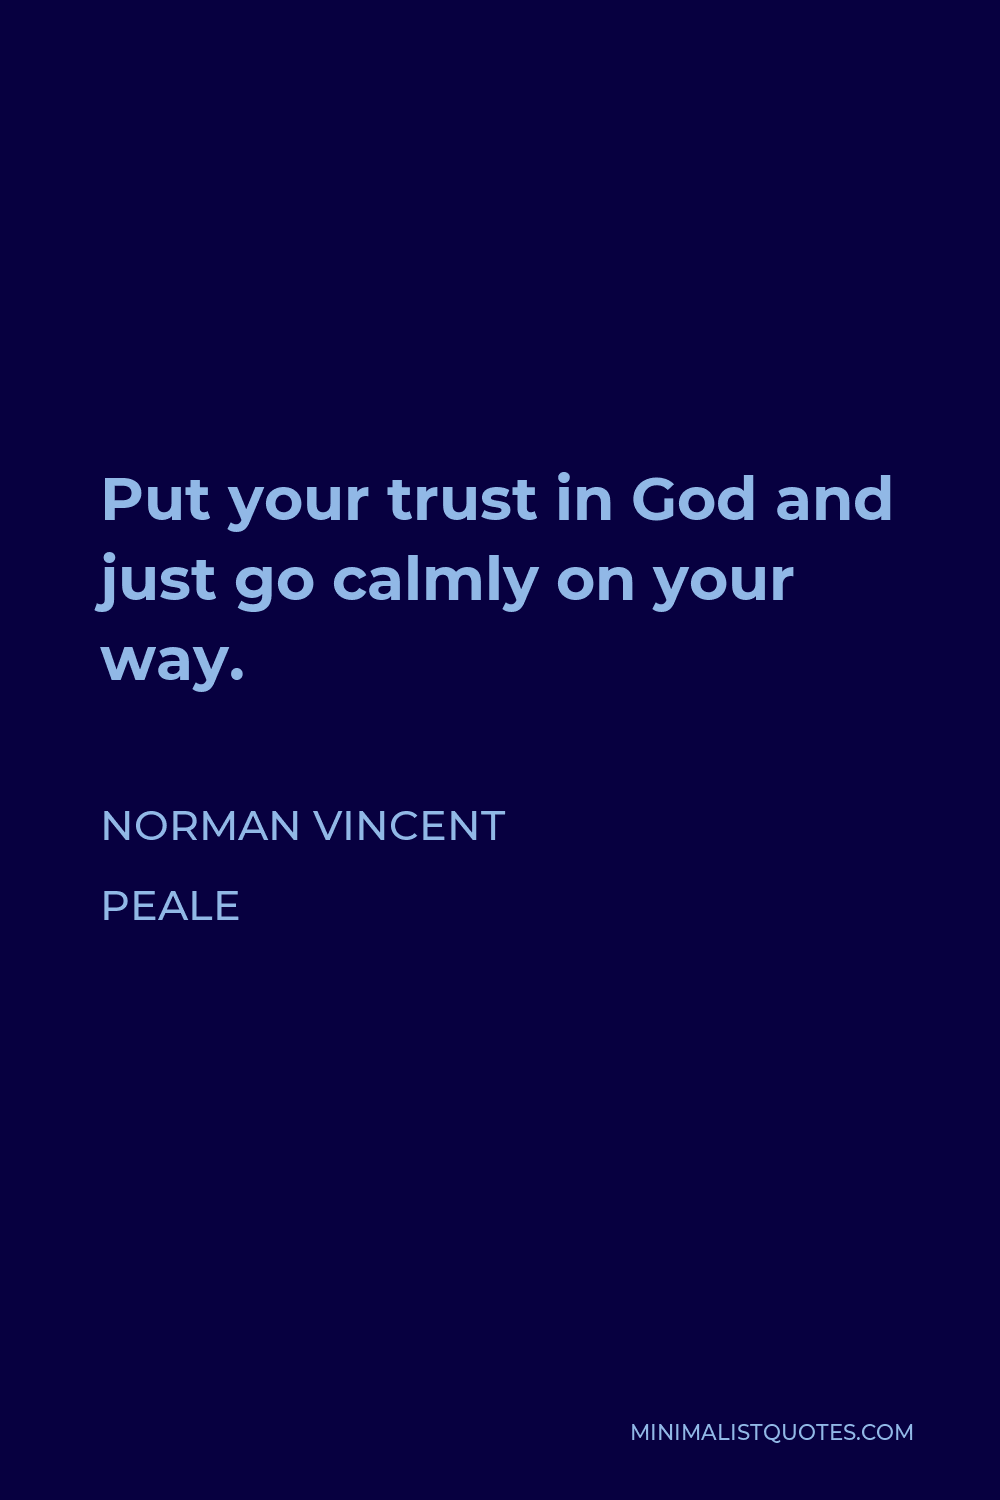 Norman Vincent Peale Quote - Put your trust in God and just go calmly on your way.